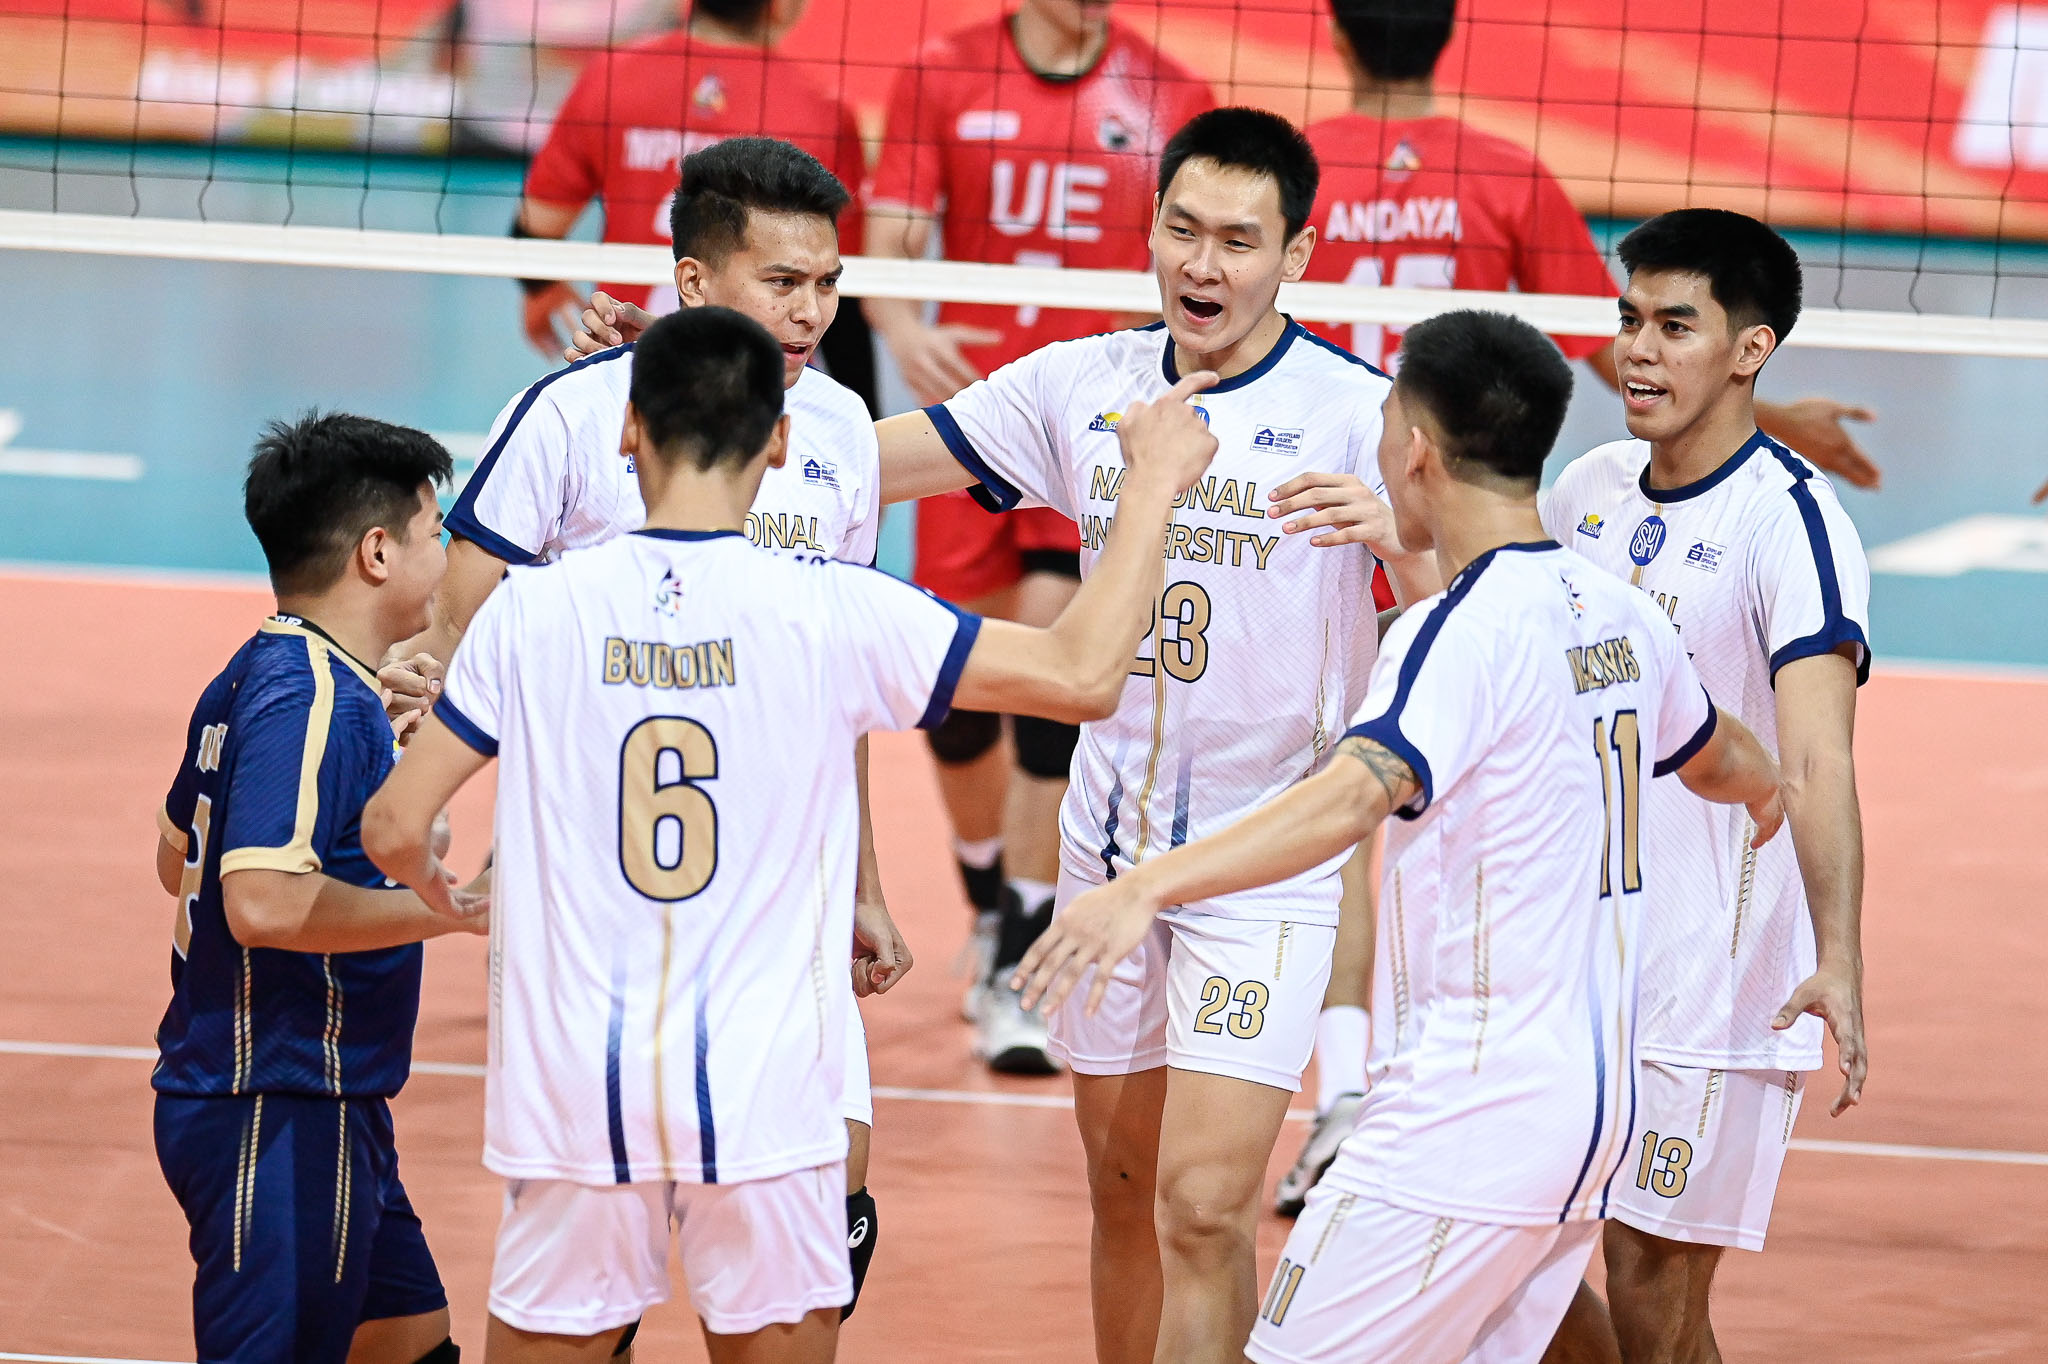 UAAP: Bryan Bagunas challenges NU Bulldogs to go for sweep | Inquirer ...